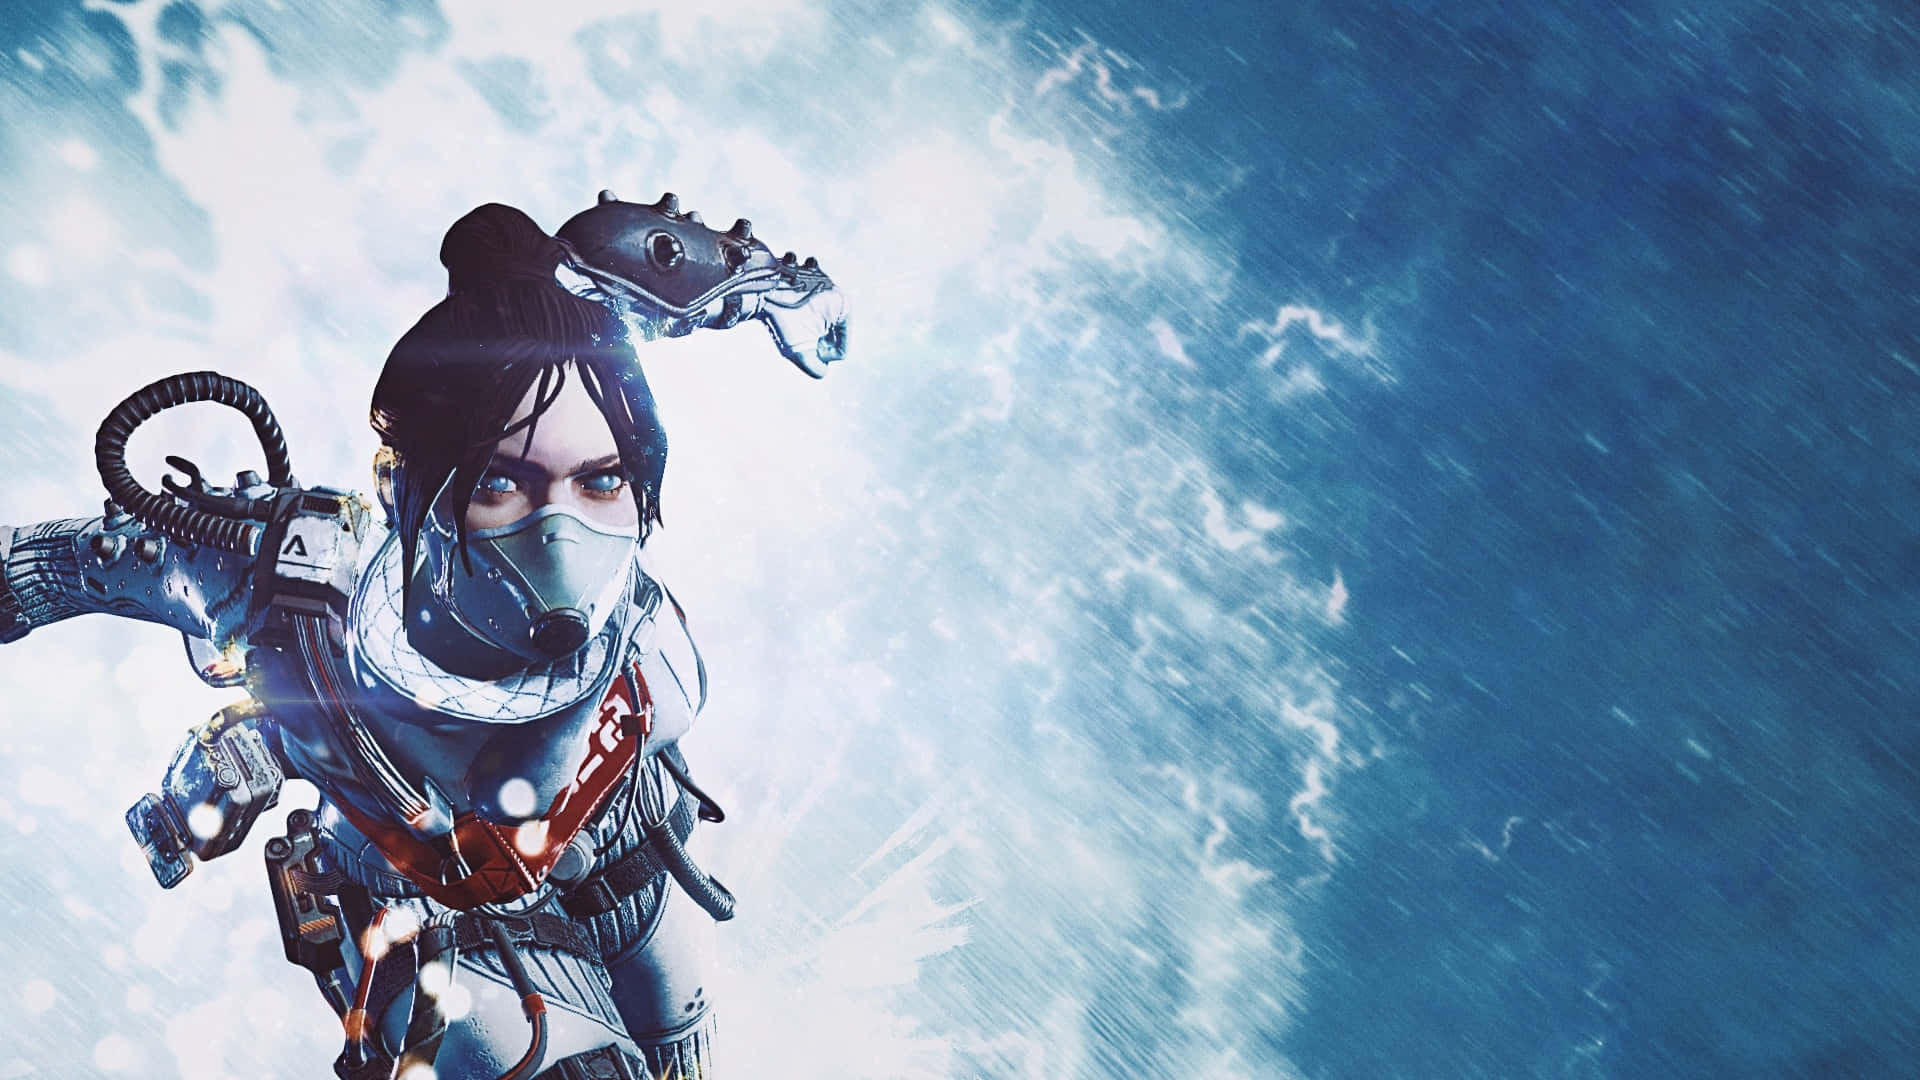 Ready for gaming domination in Apex Legends Wallpaper